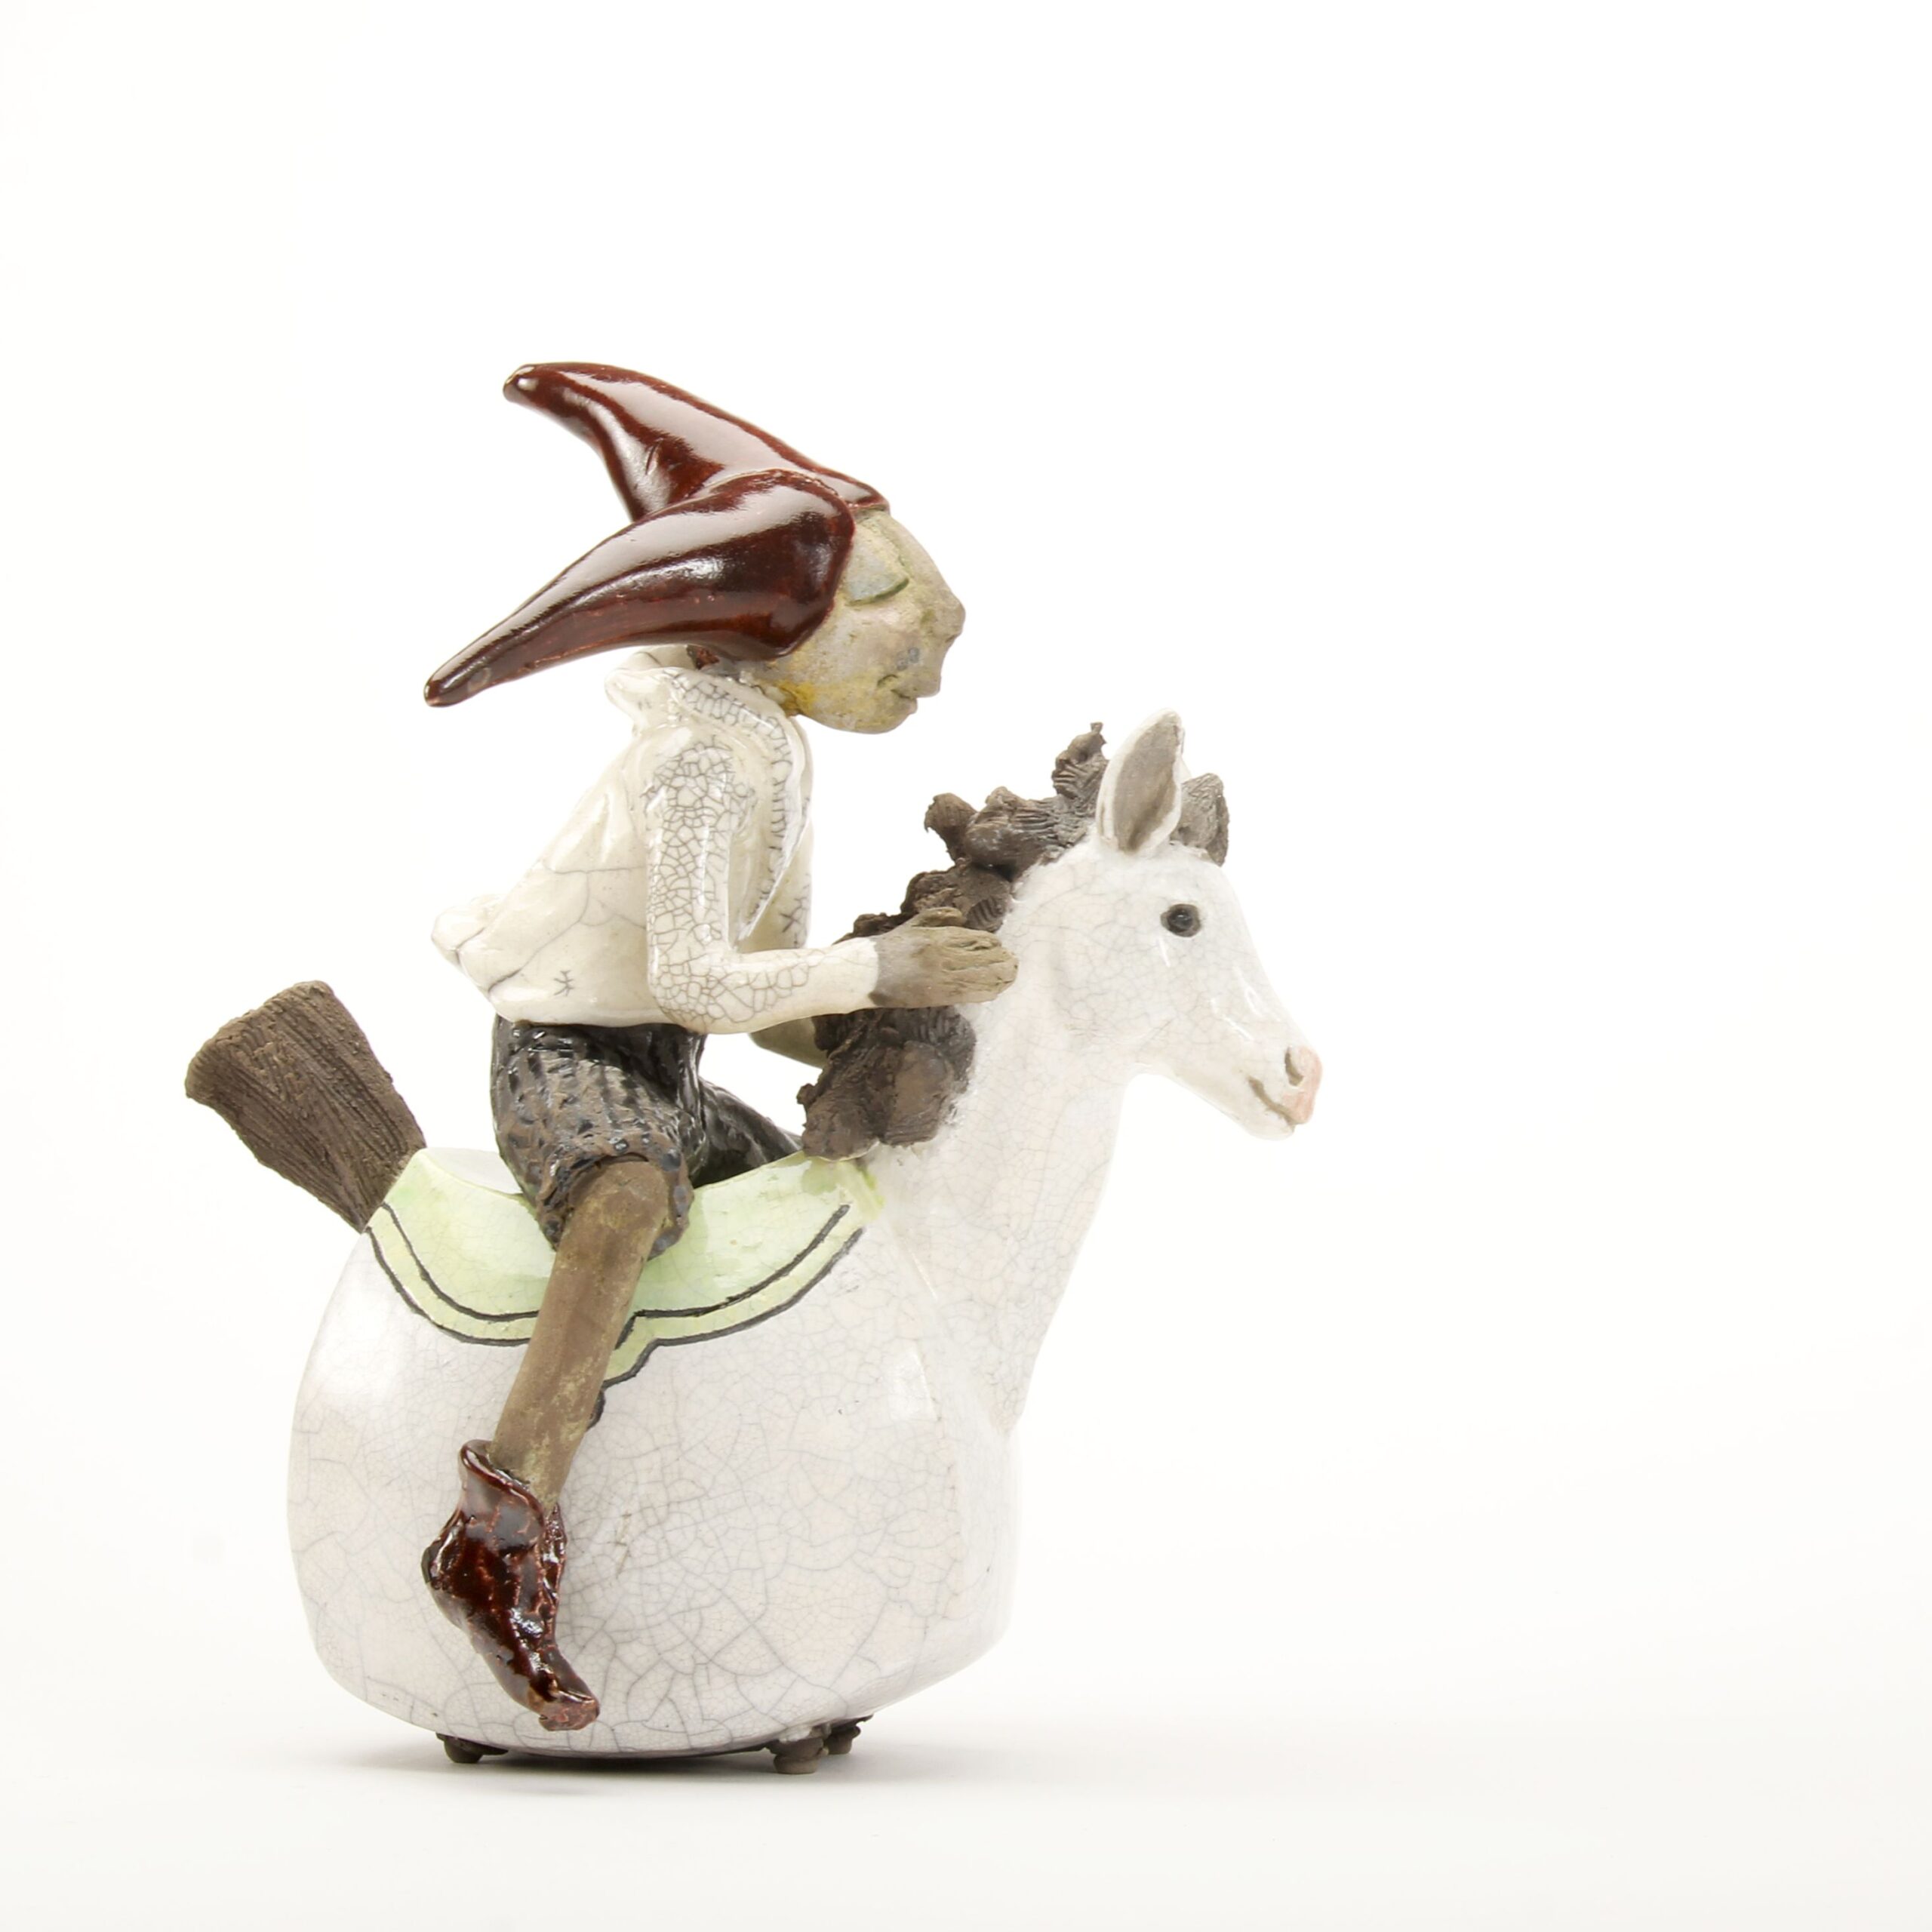 Zsuzsa Monostory: Rocking Horse with Figure Product Image 2 of 5